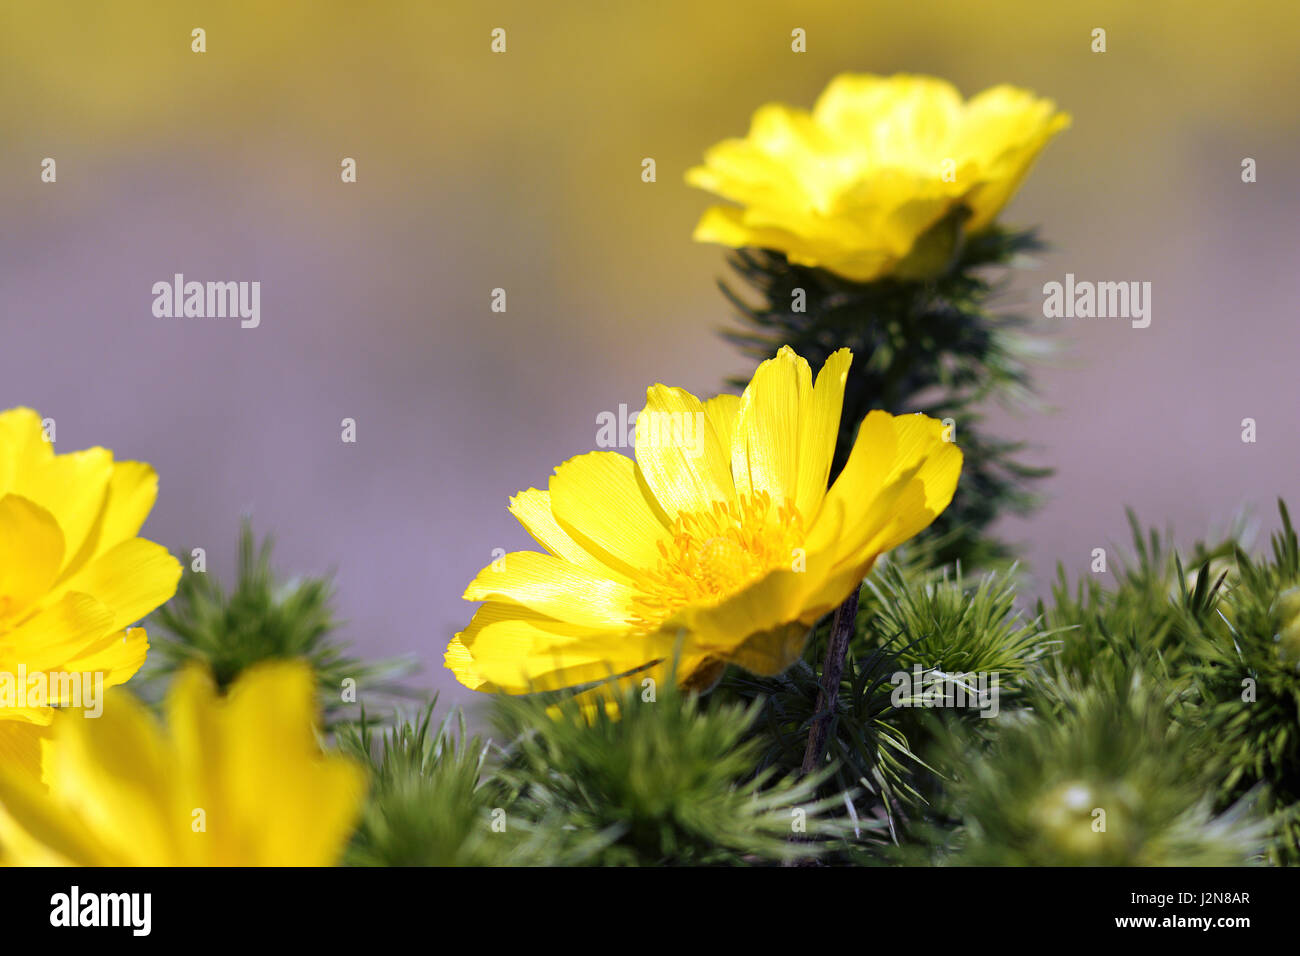 detail of Adonis vernalis, one of the first spring flowers ( yellow pheasant's eye ) Stock Photo